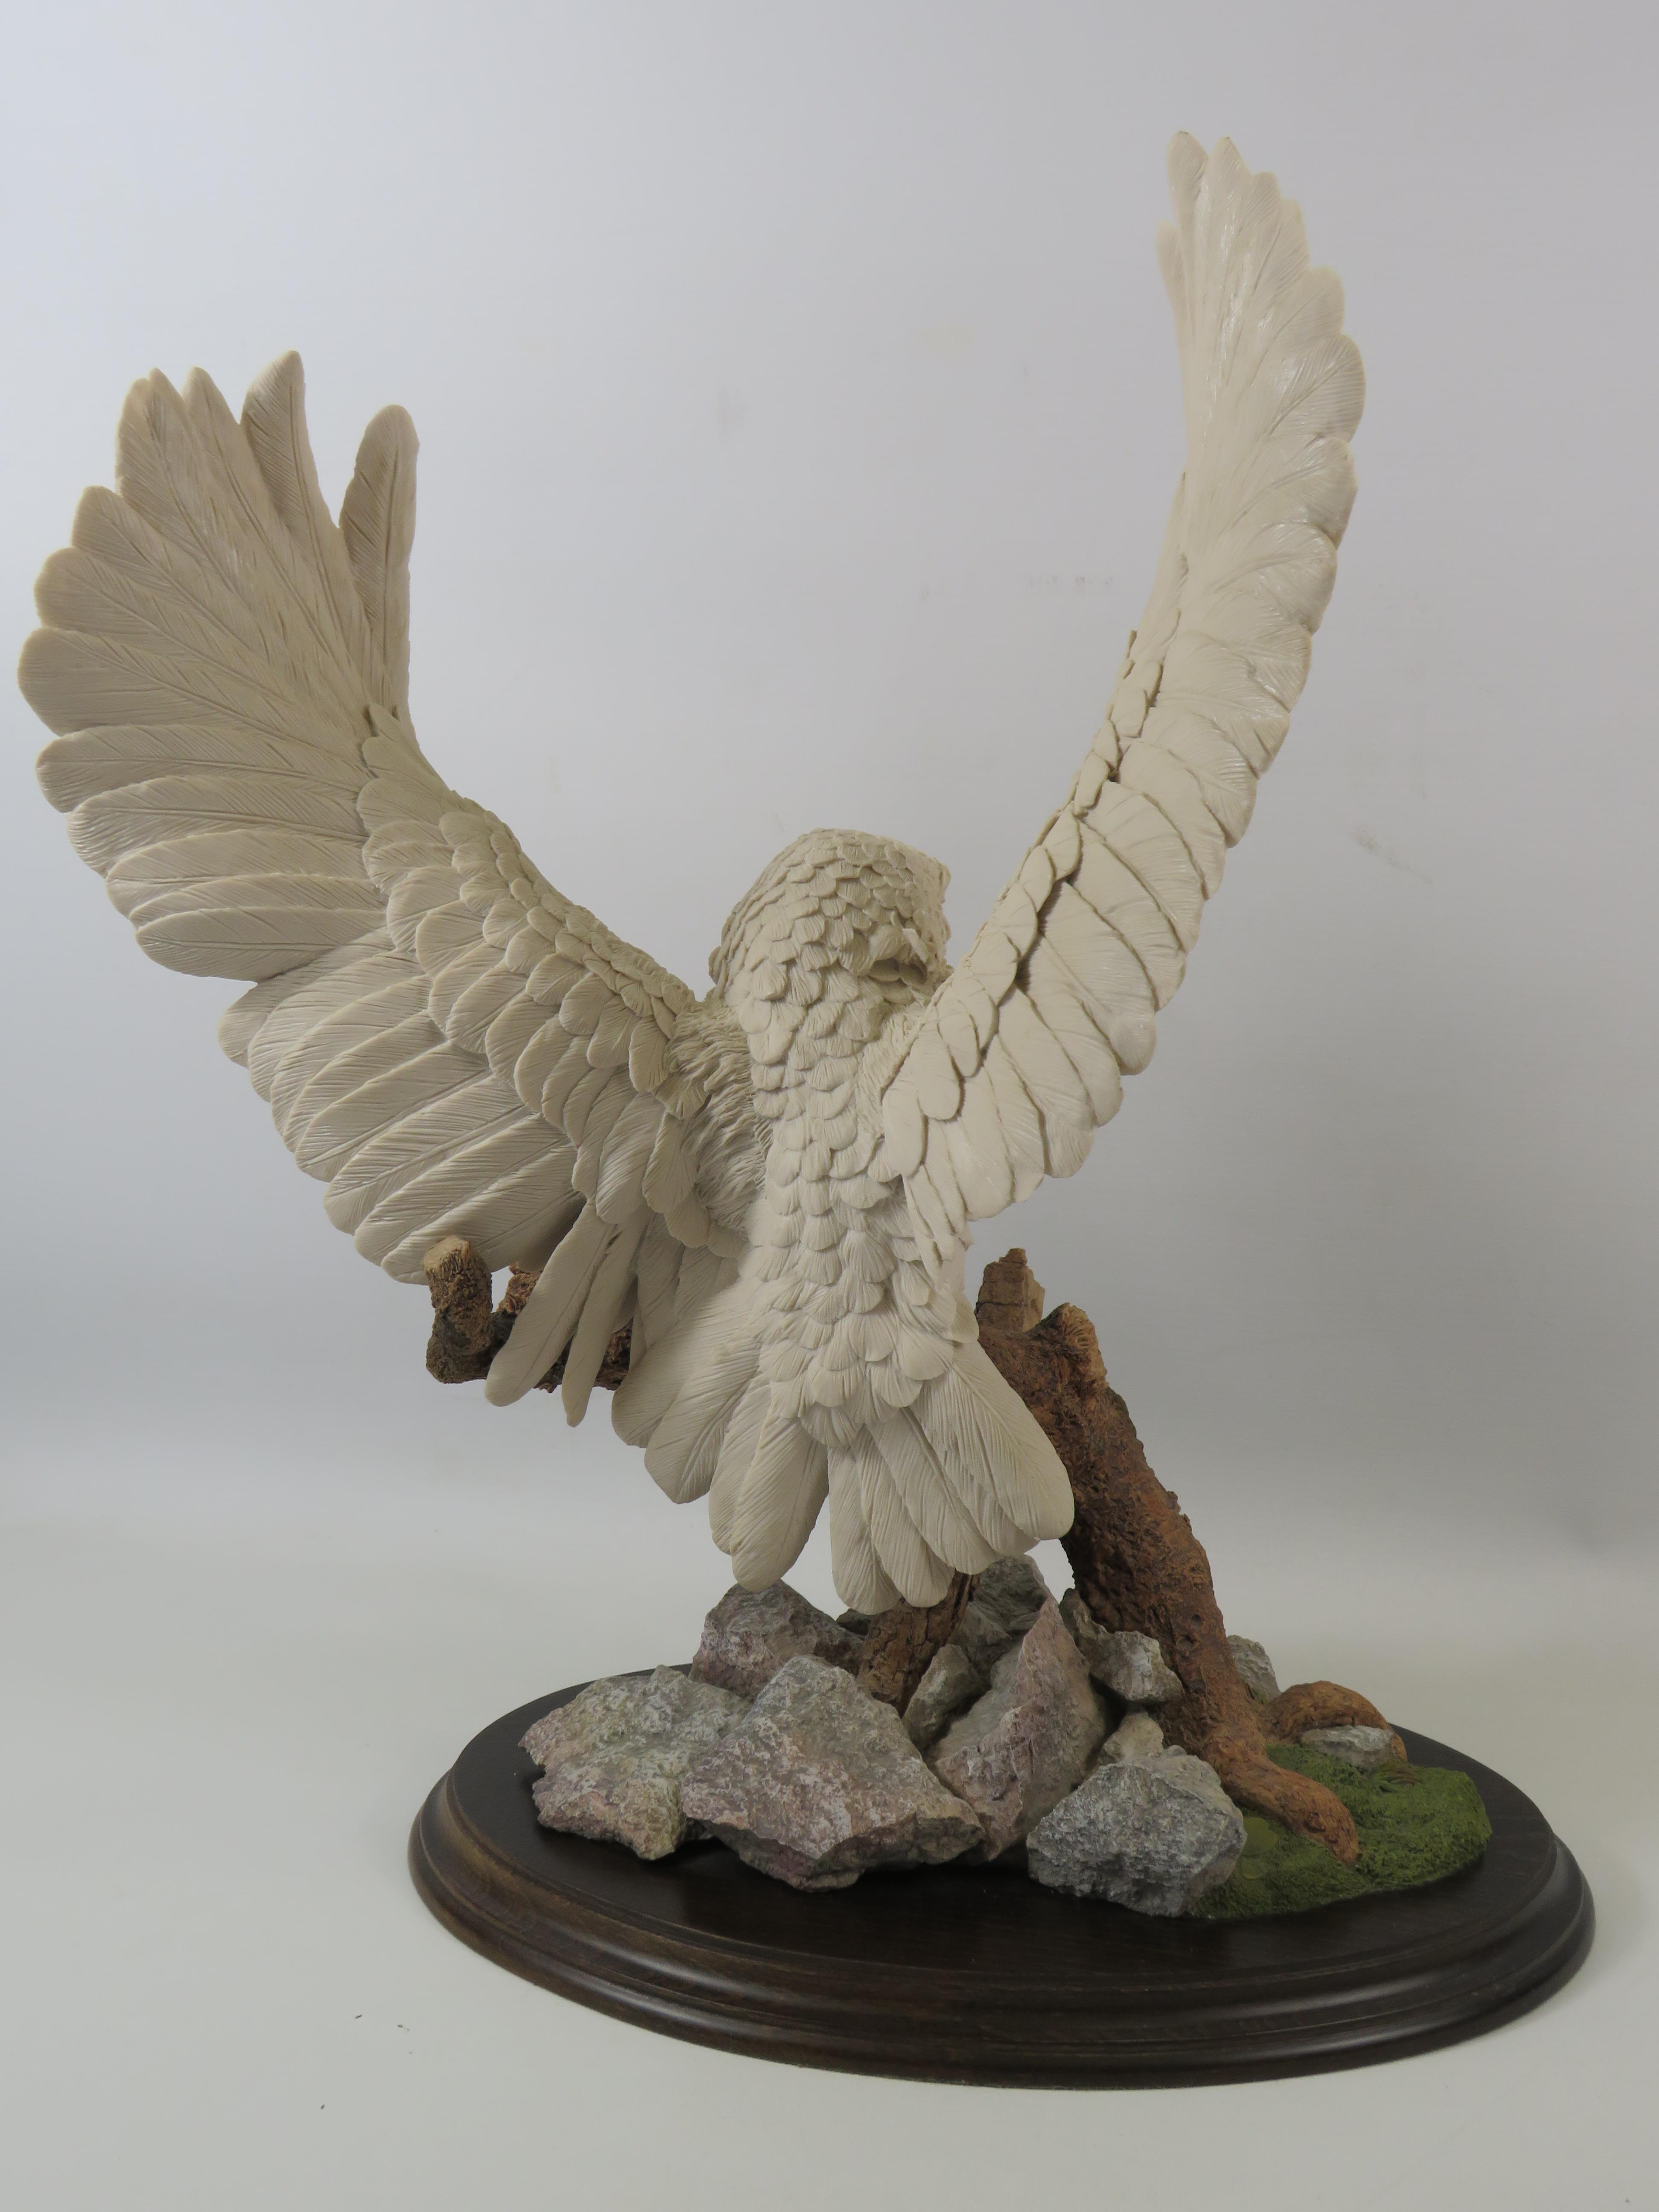 Large Country Artist limited edition sculpture of an Owl "White Splender" No 209 of 350 with cert no - Image 3 of 5